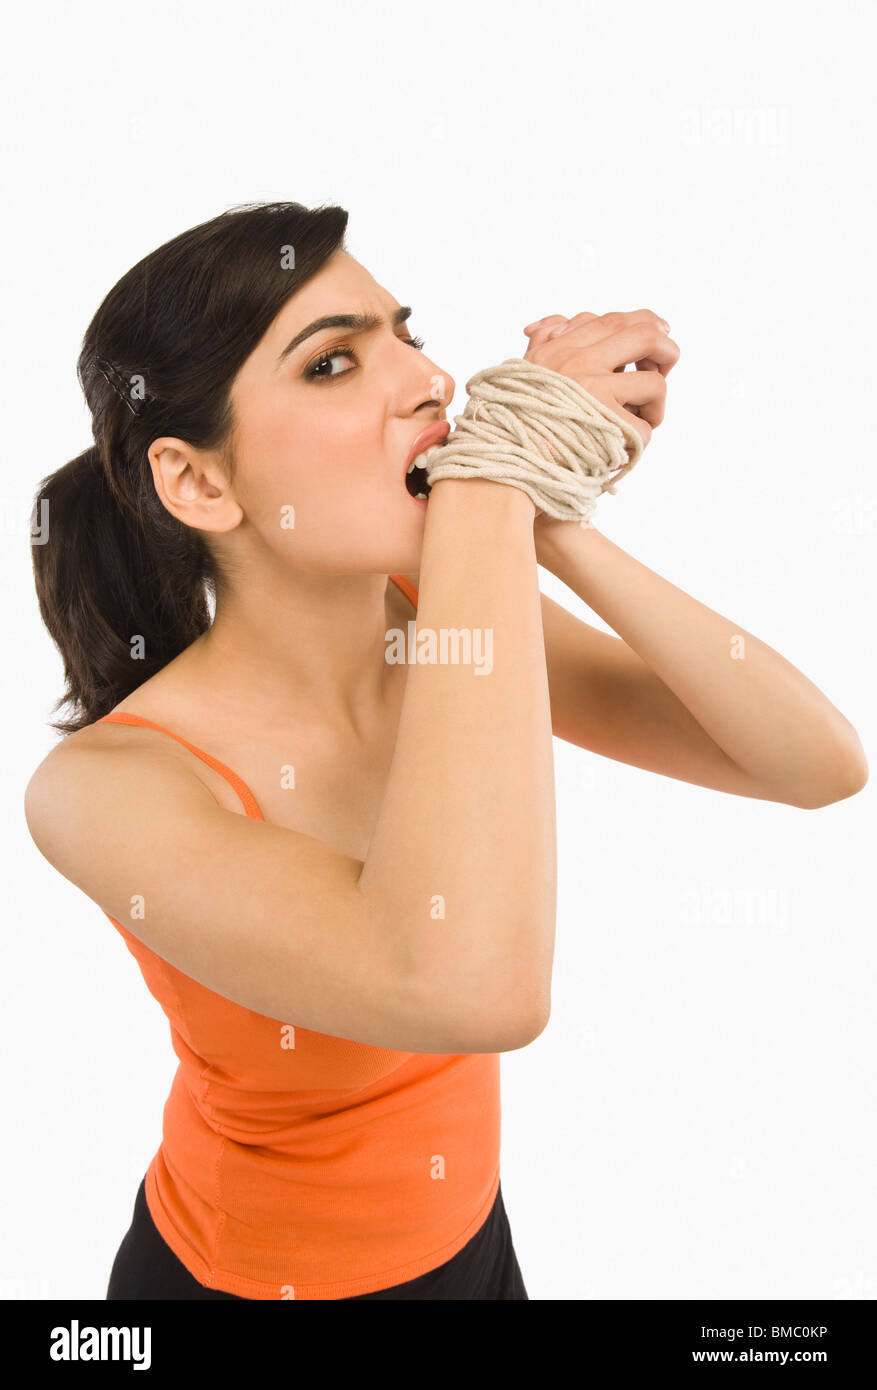 Woman's hands tied with a rope Stock Photo